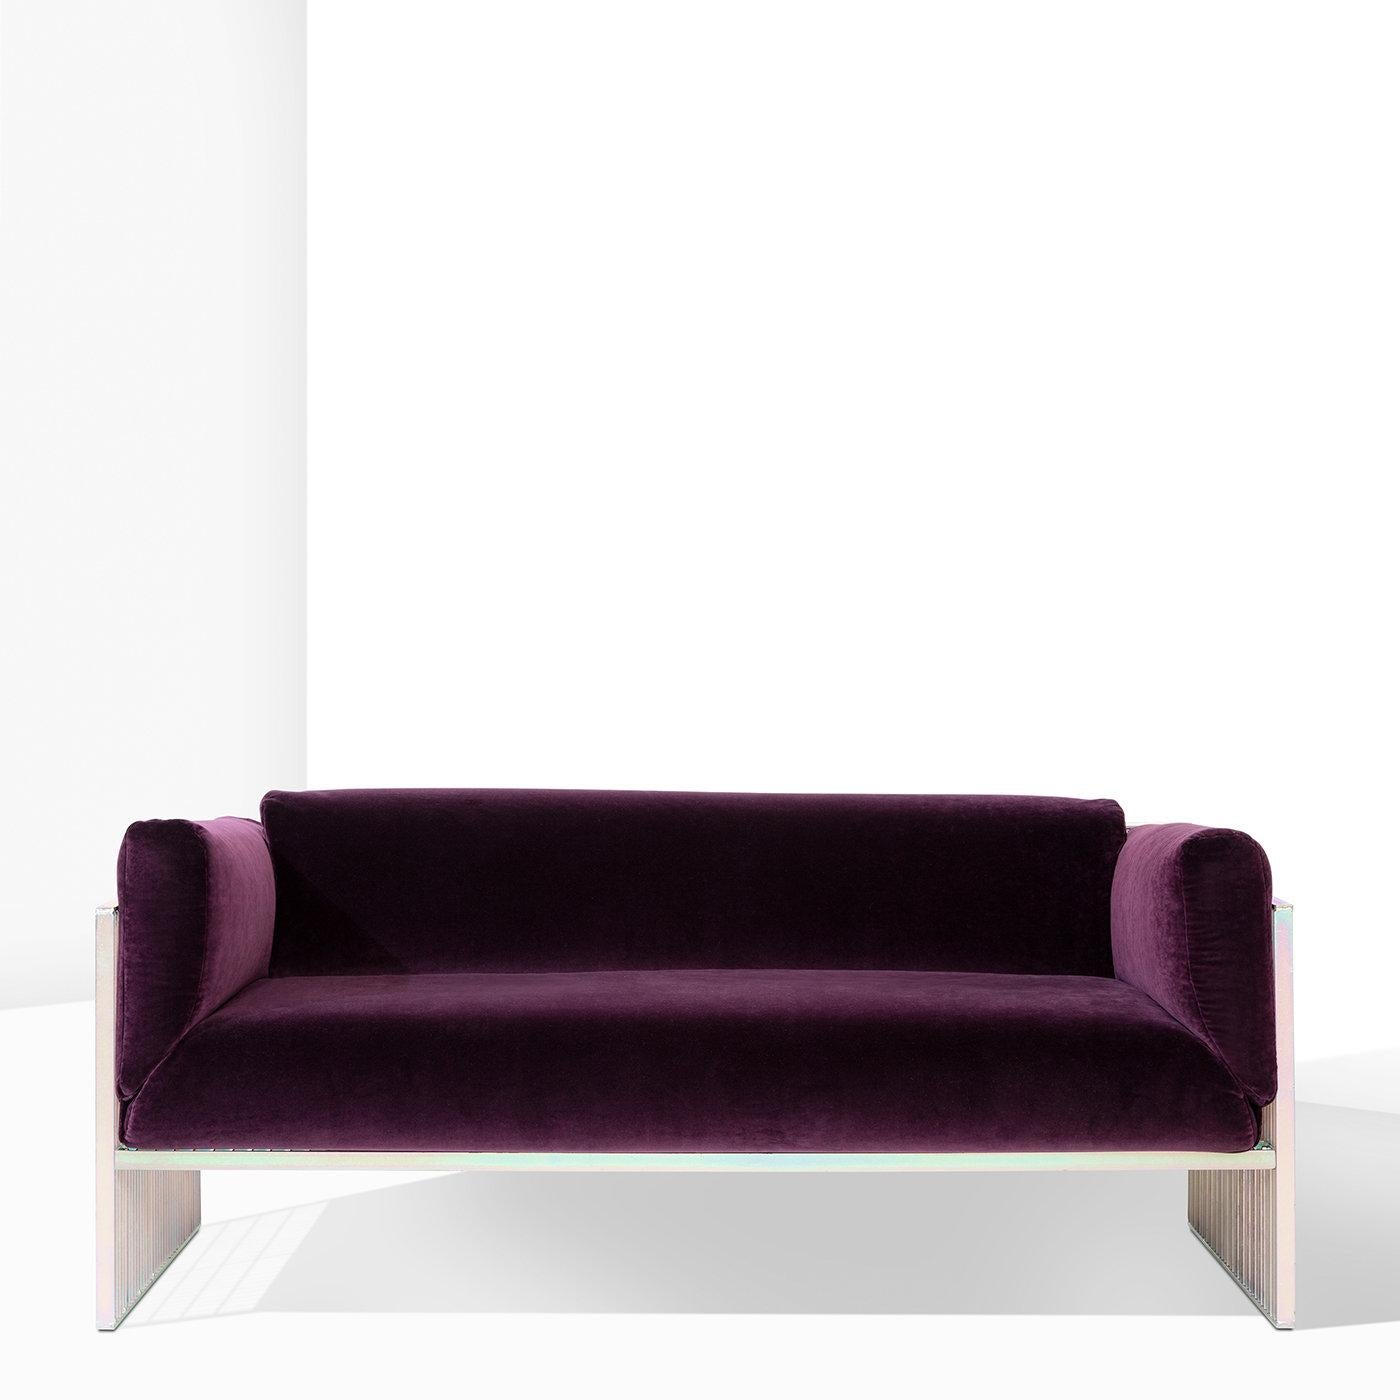 This statement-making sofa from the Bacchetta Capsule Collection is the perfect synthesis of industrial-inspired style and comfort. Enveloped in soft plum velvet, the voluptuous seat is set in a rigorous, grid-like iron frame boasting a charming